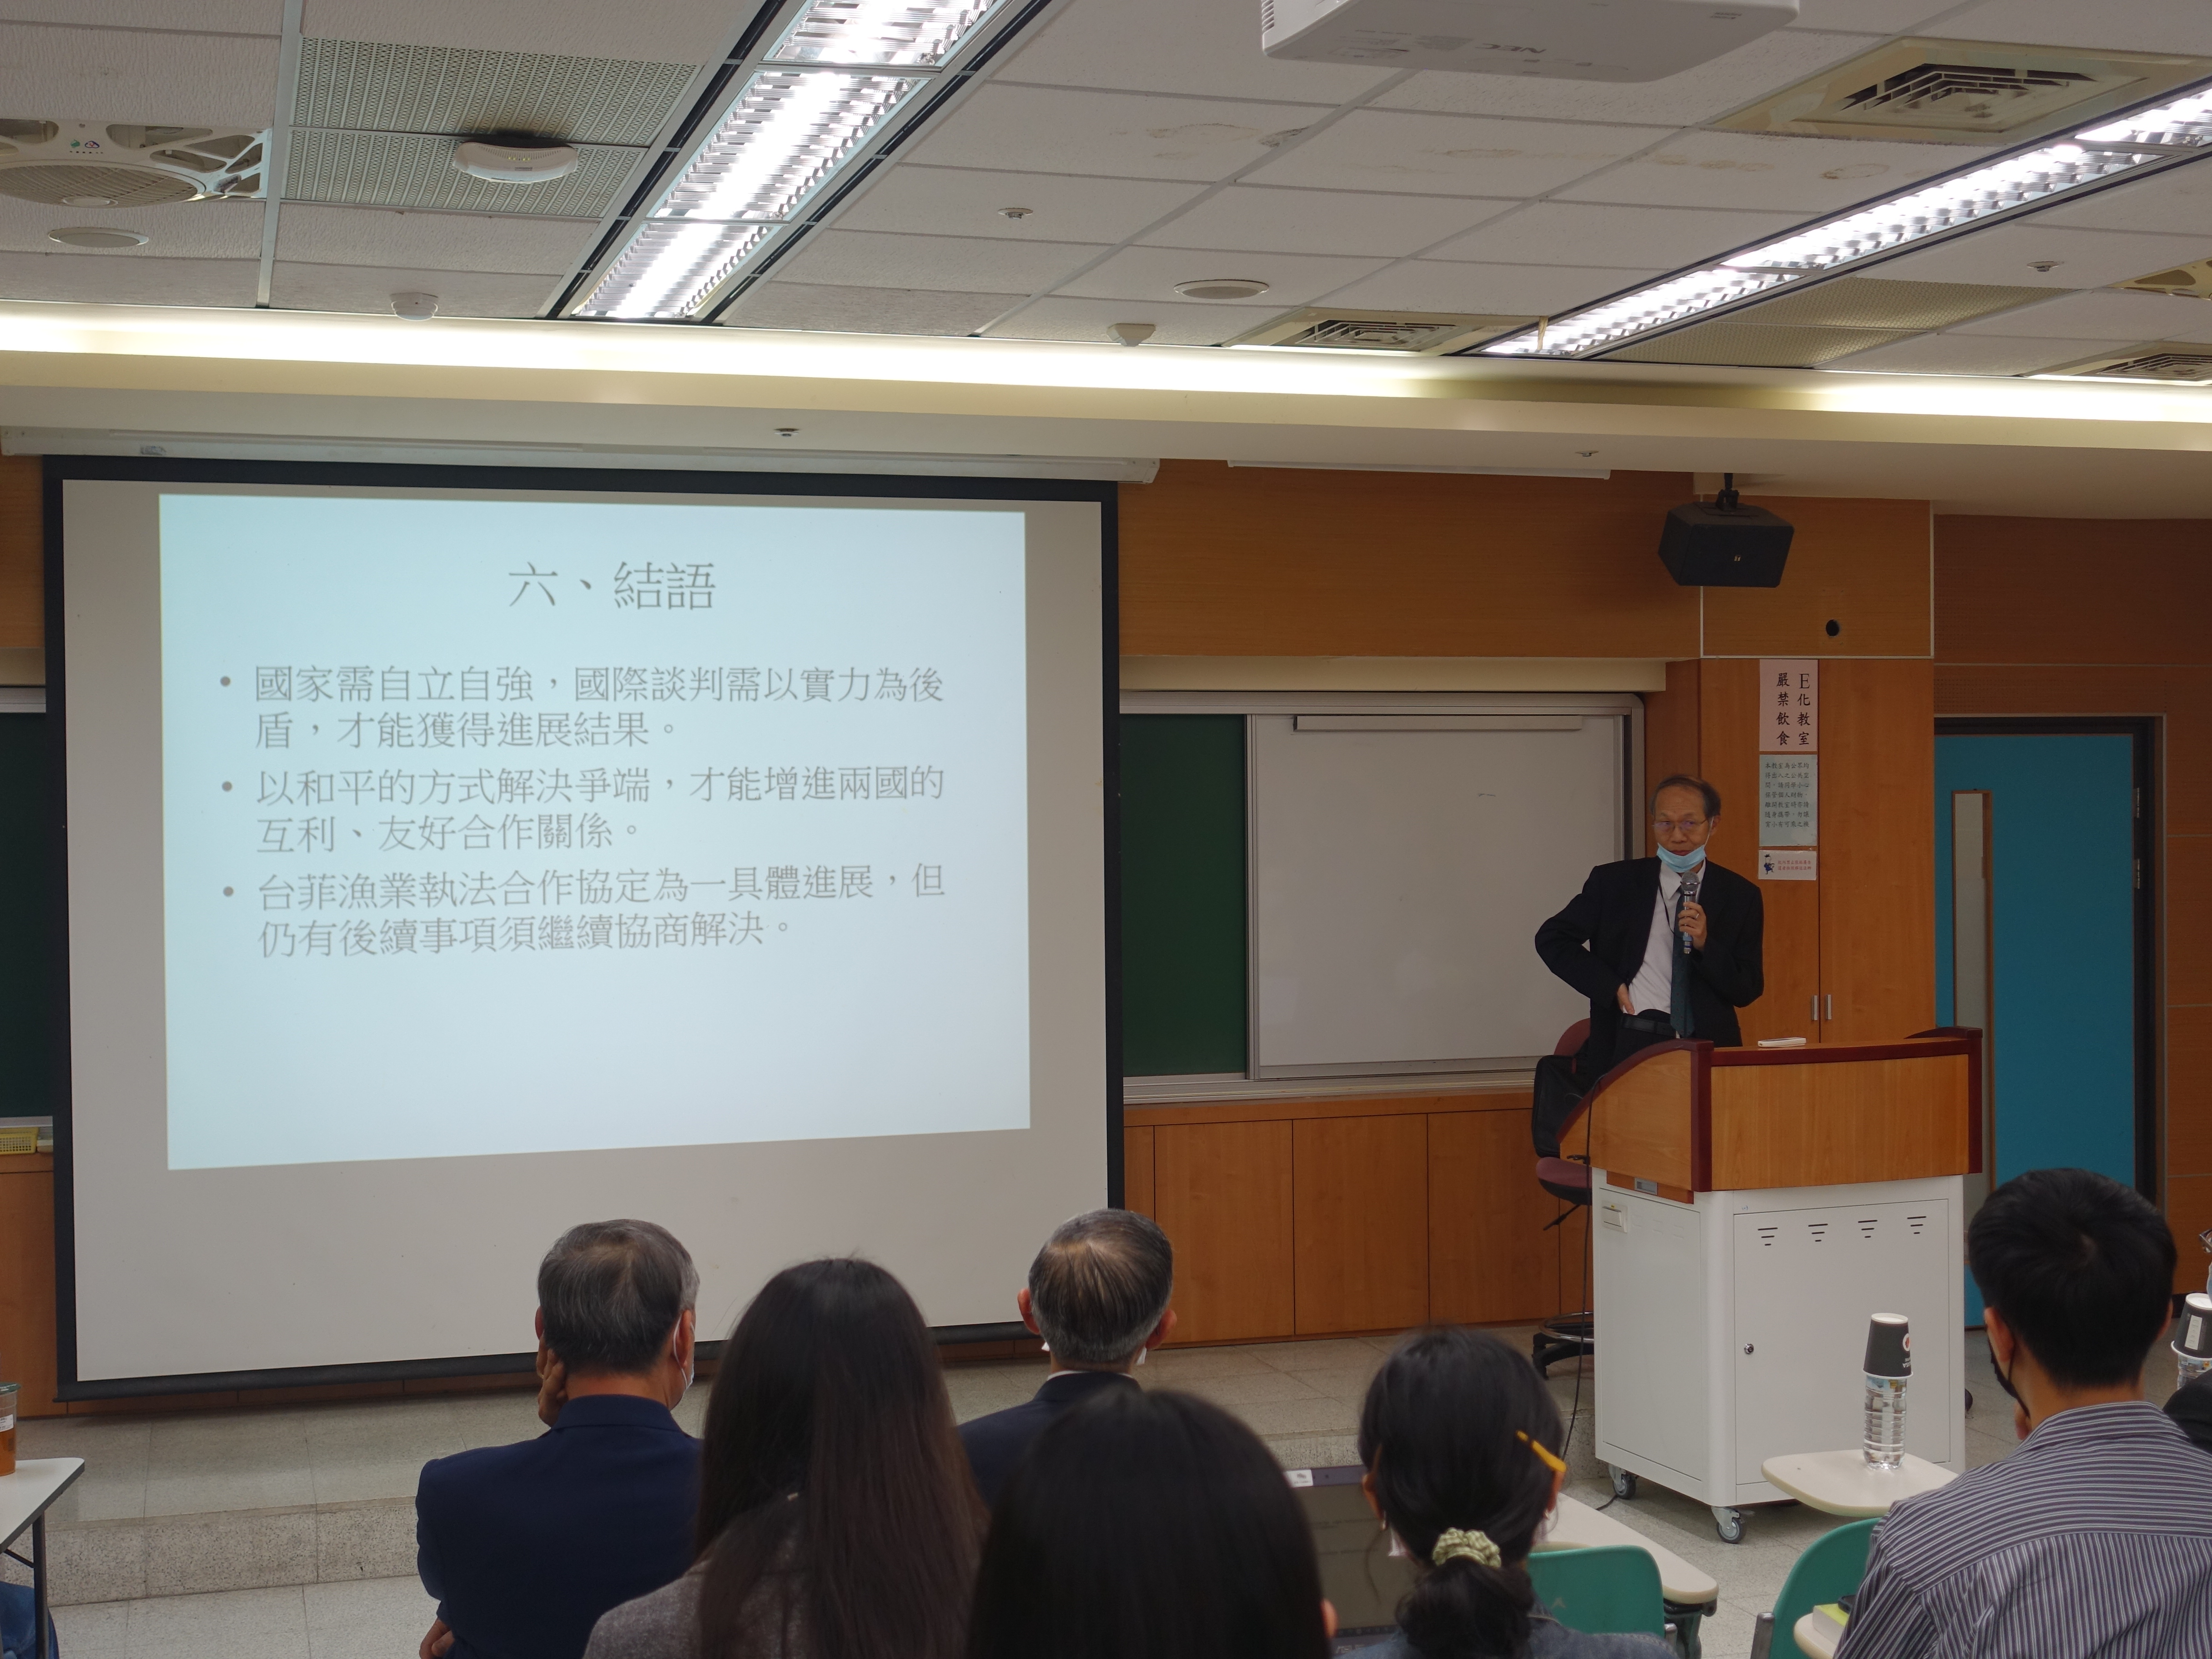 Presentation by former Minister of Affairs 林永樂部長